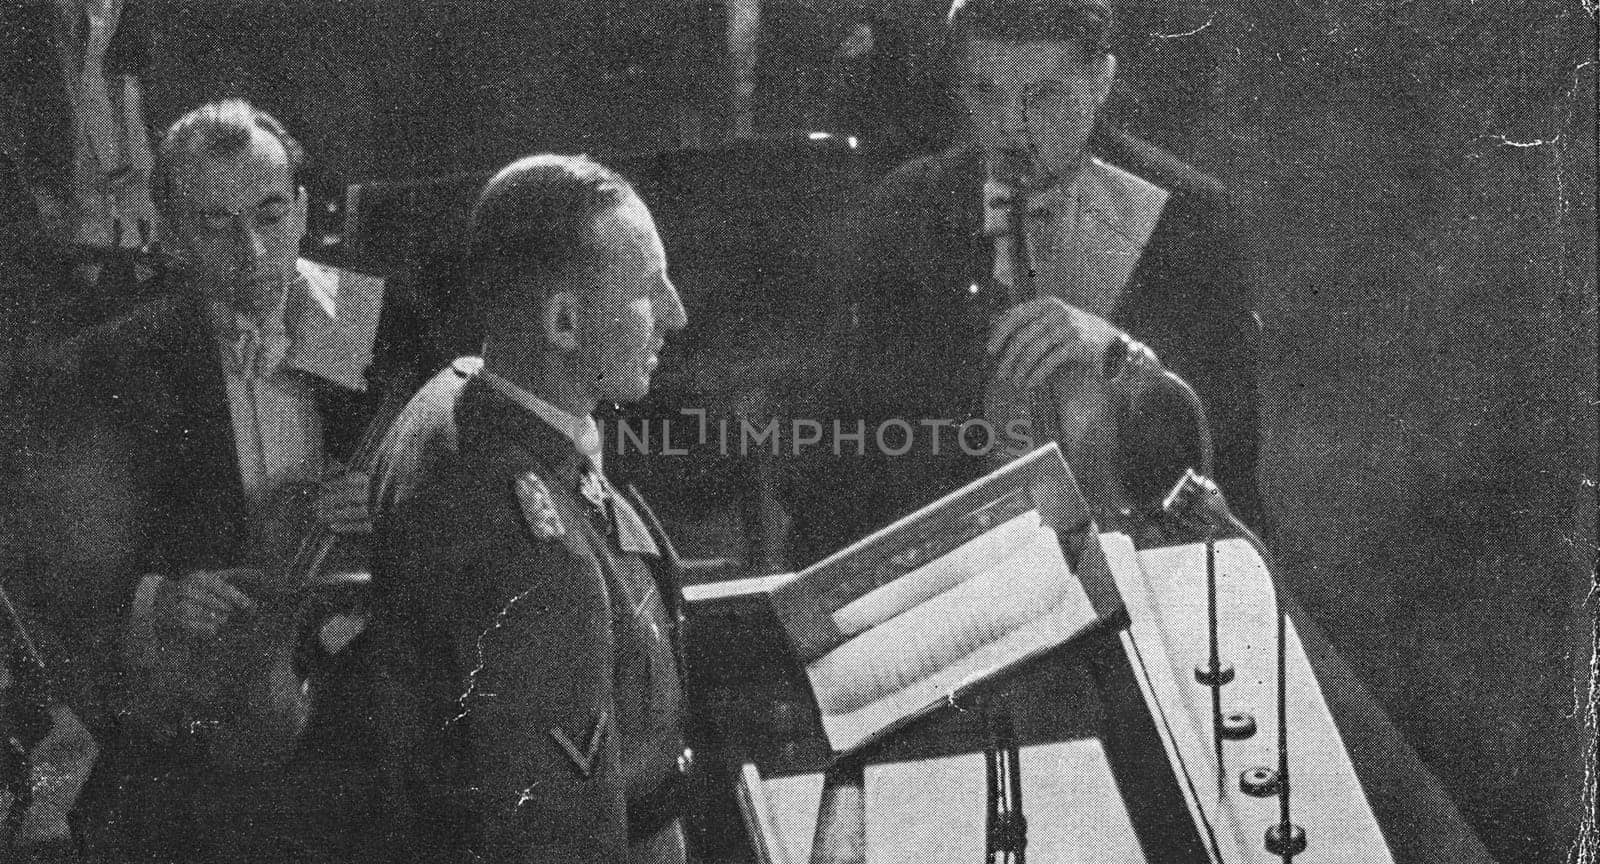 Reinhard Heydrich, Deputy Reich Protector of the Protectorate of Bohemia and Moravia, adresses to audience. by roman_nerud